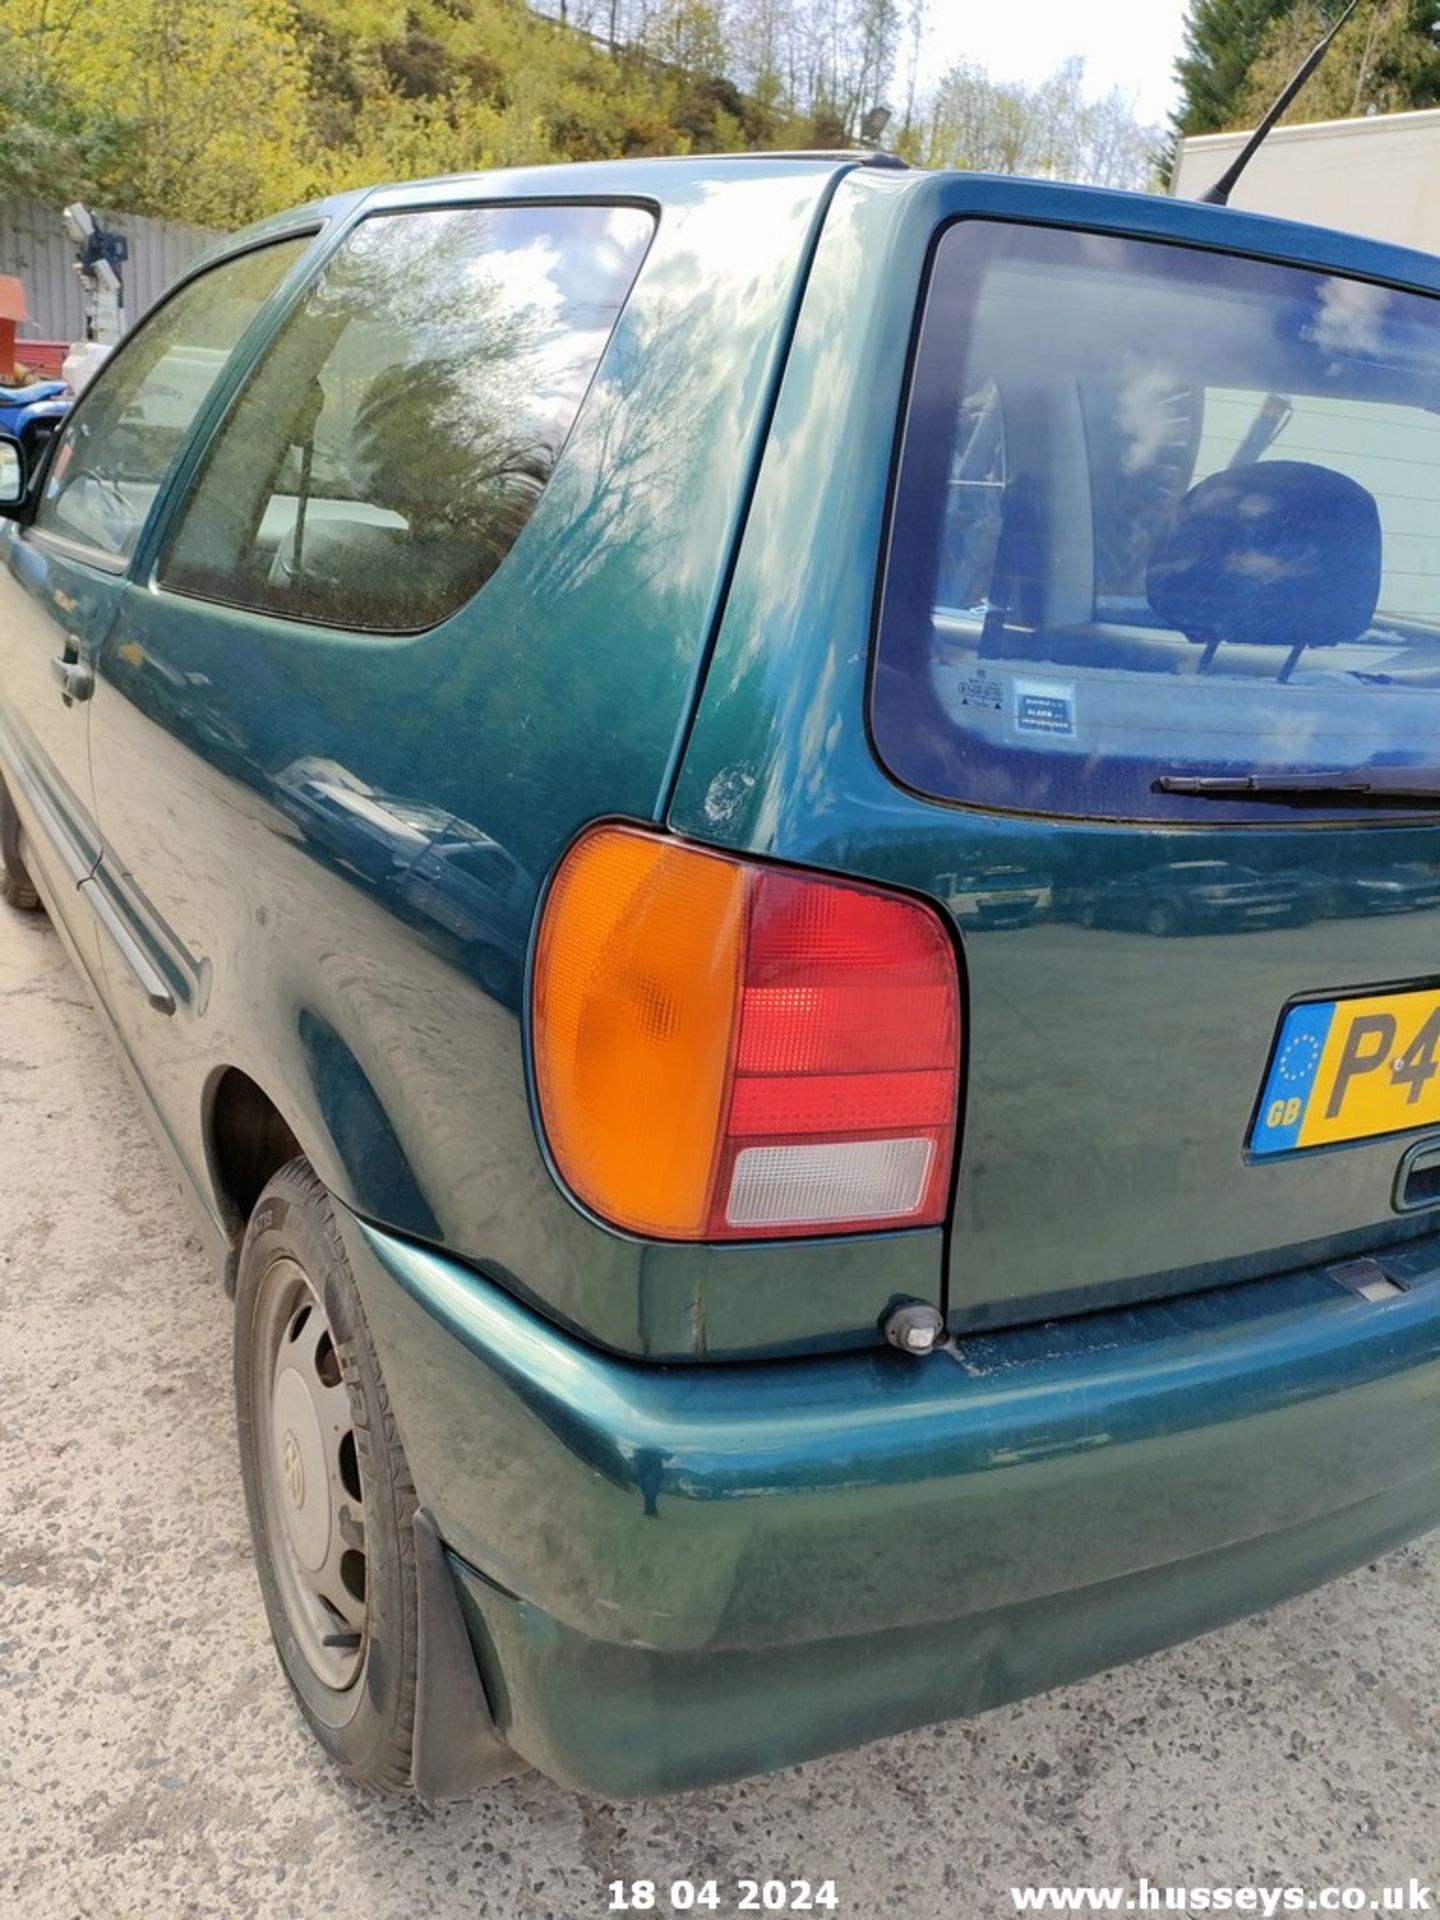 1997 VOLKSWAGEN POLO 1.4 CL AUTO - 1390cc 3dr Hatchback (Green, 68k) - Image 28 of 60